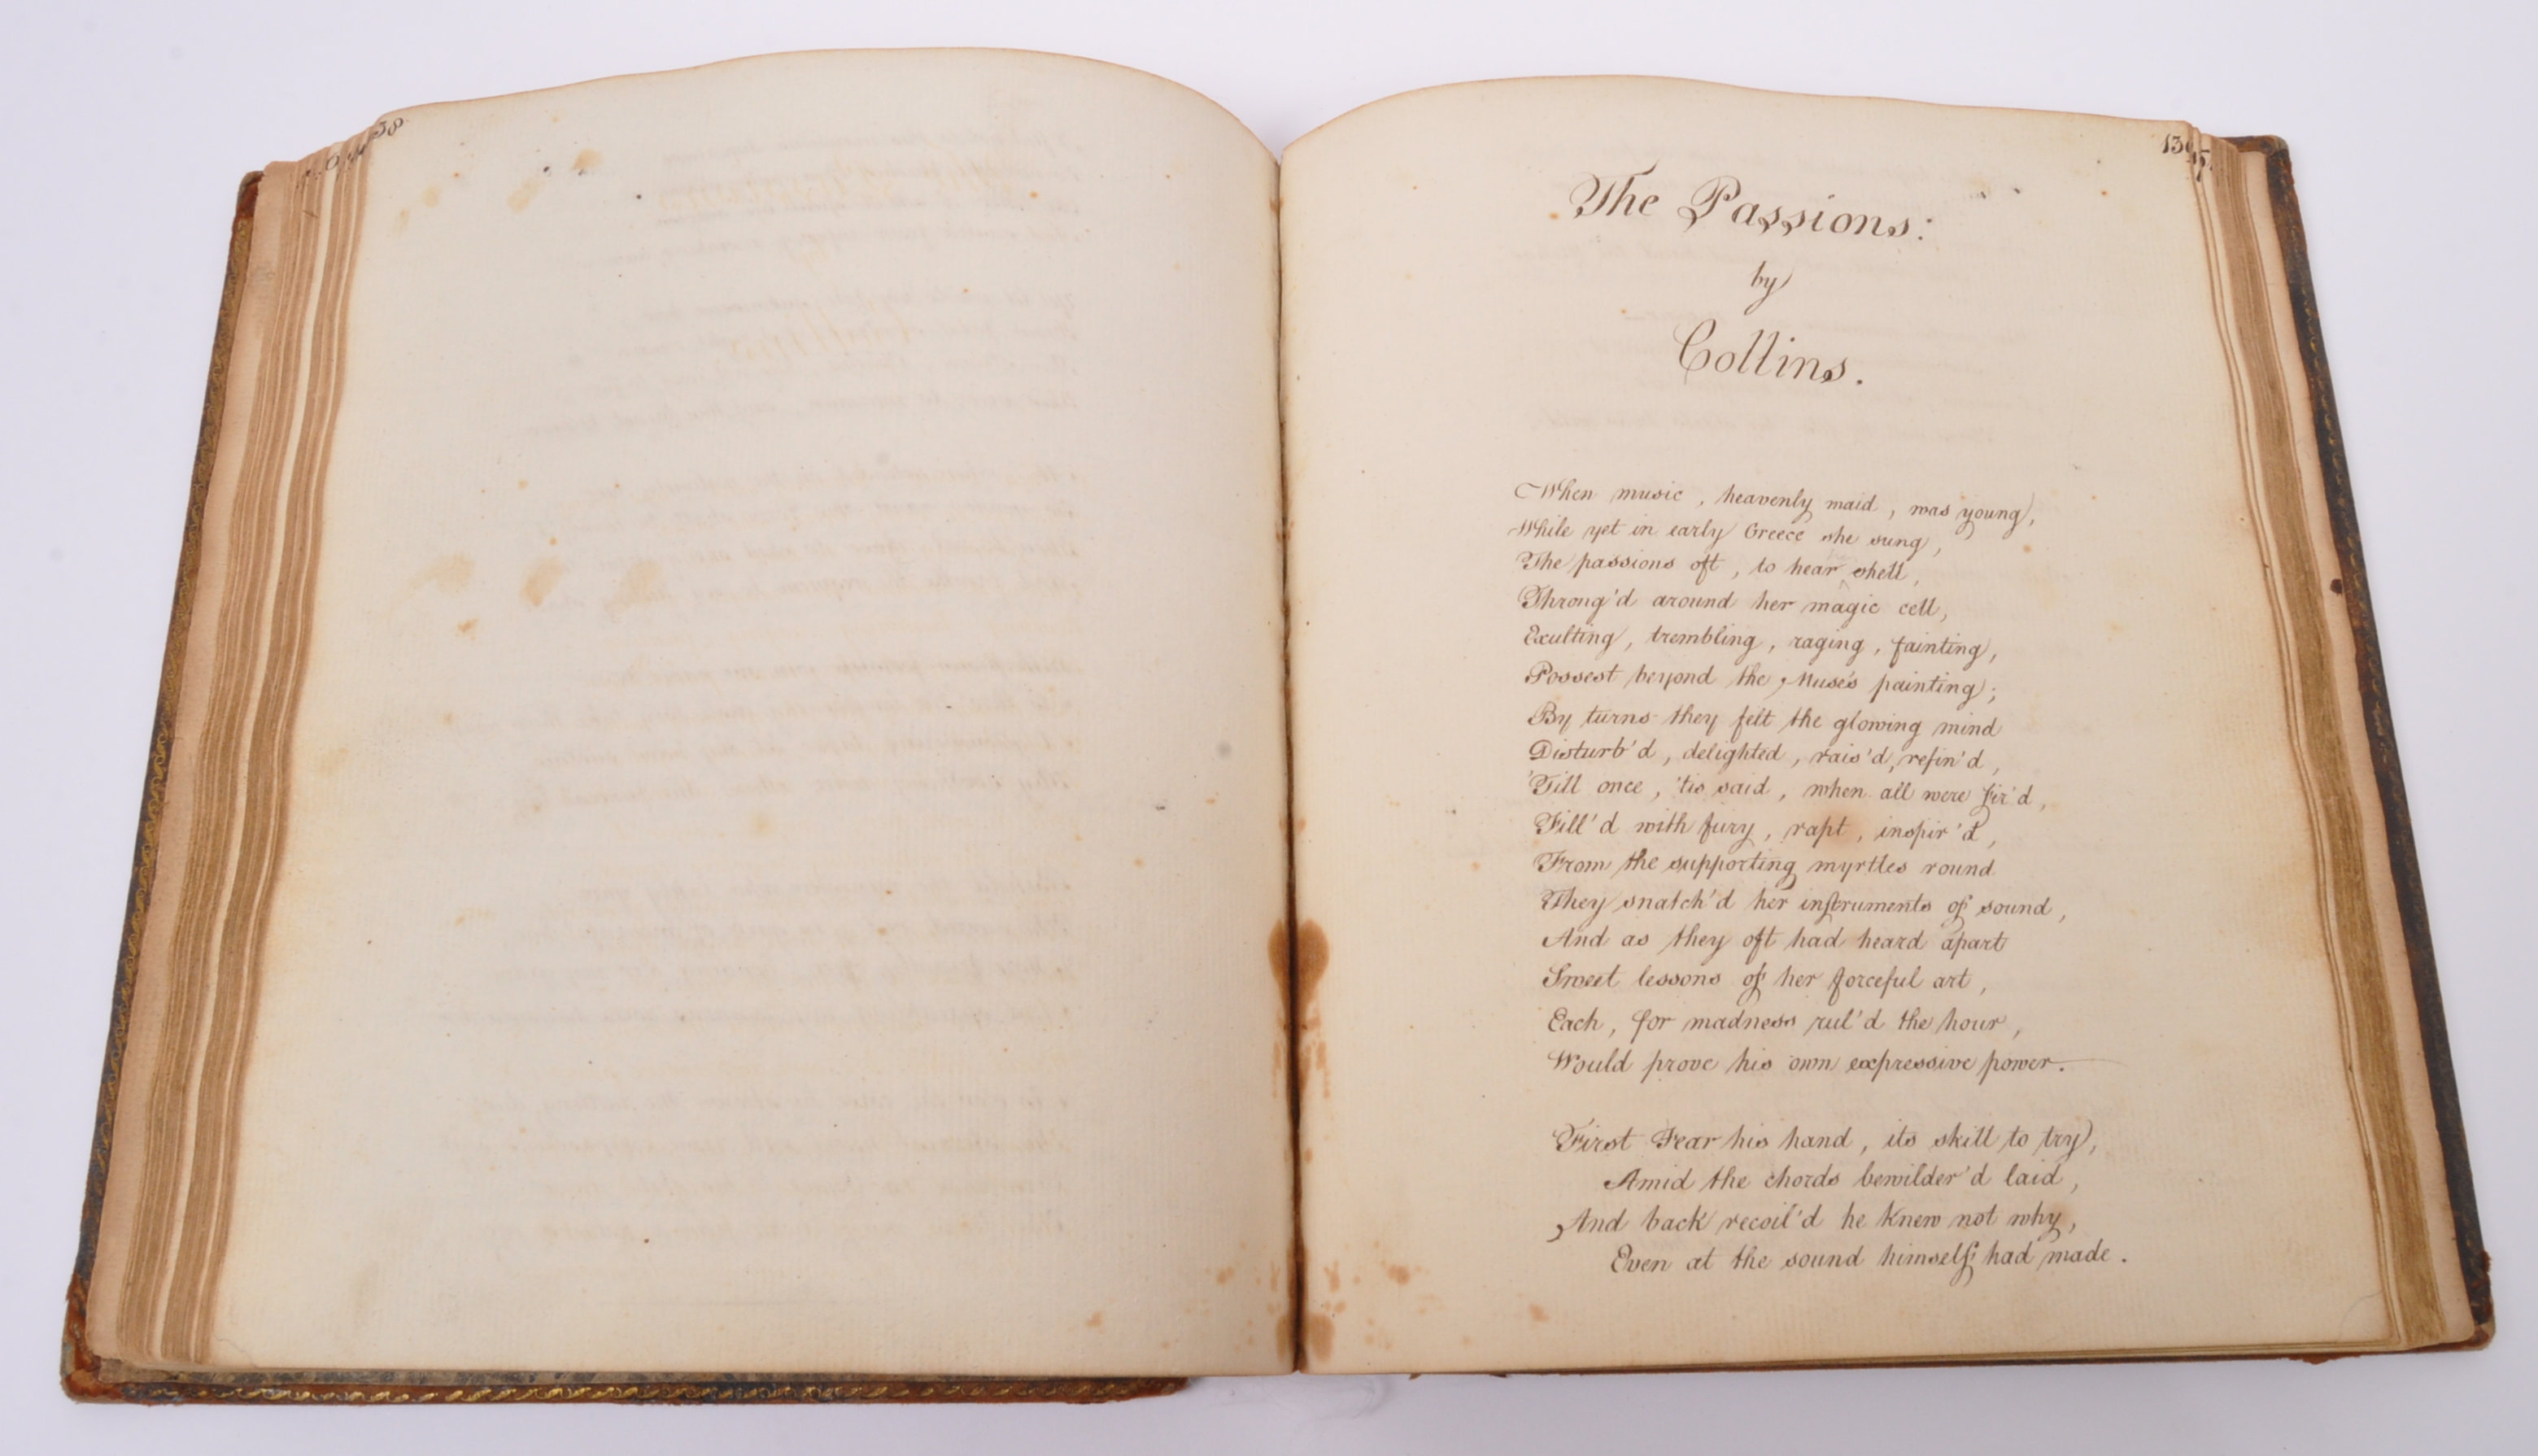 1794 - A COLLECTION OF POEMS - HANDWRITTEN MANUSCRIPT BOOK - Image 10 of 13